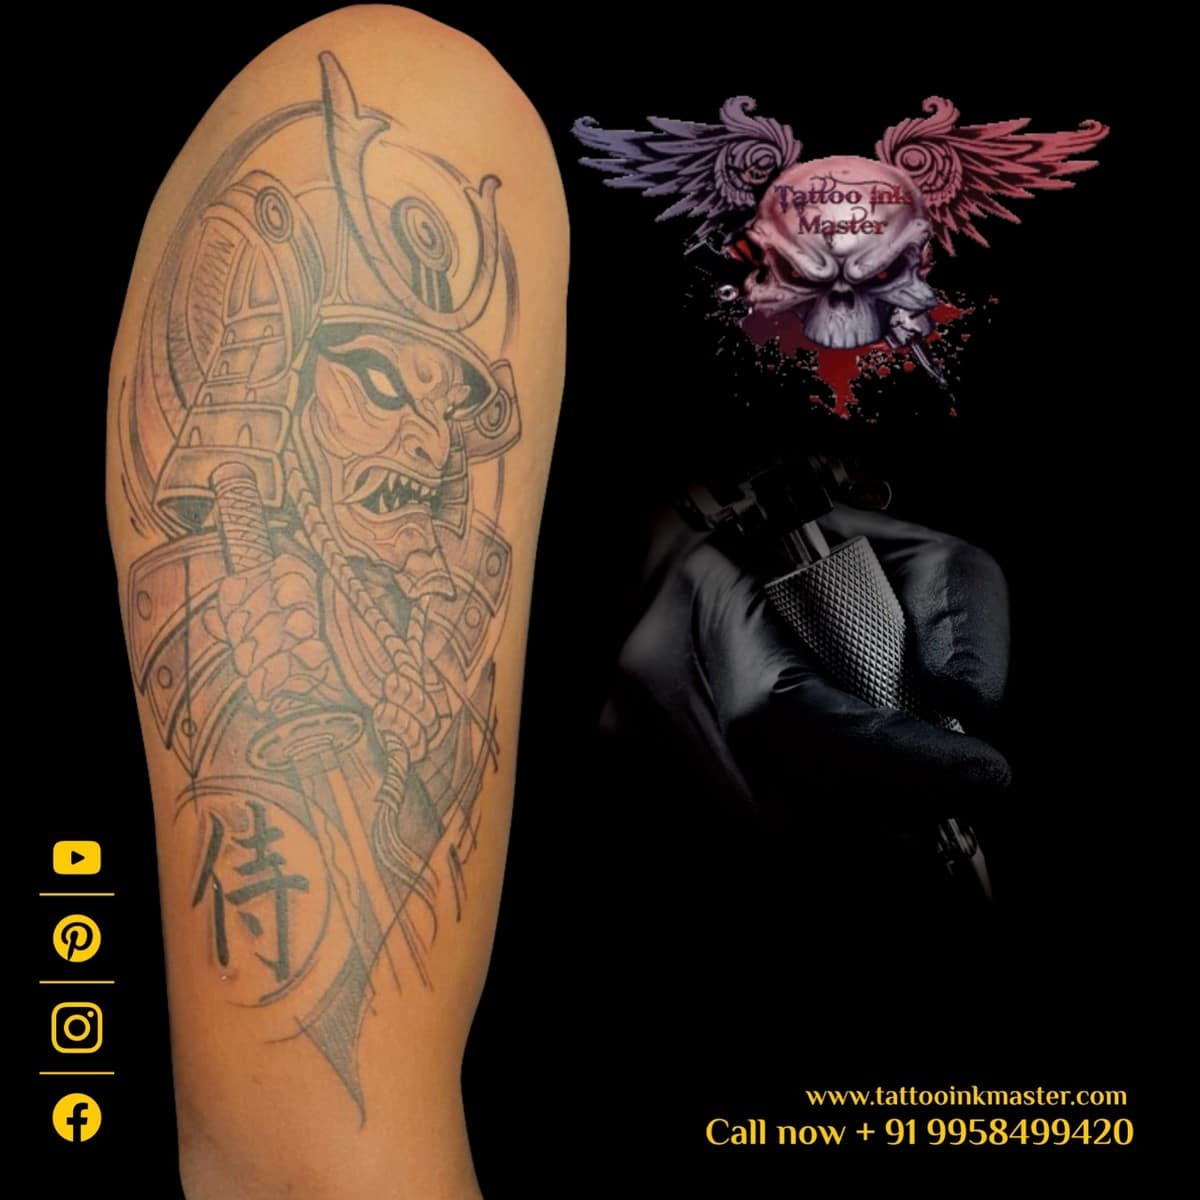 You are currently viewing Charismatic Japanese Warrior Tattoo in Full Size